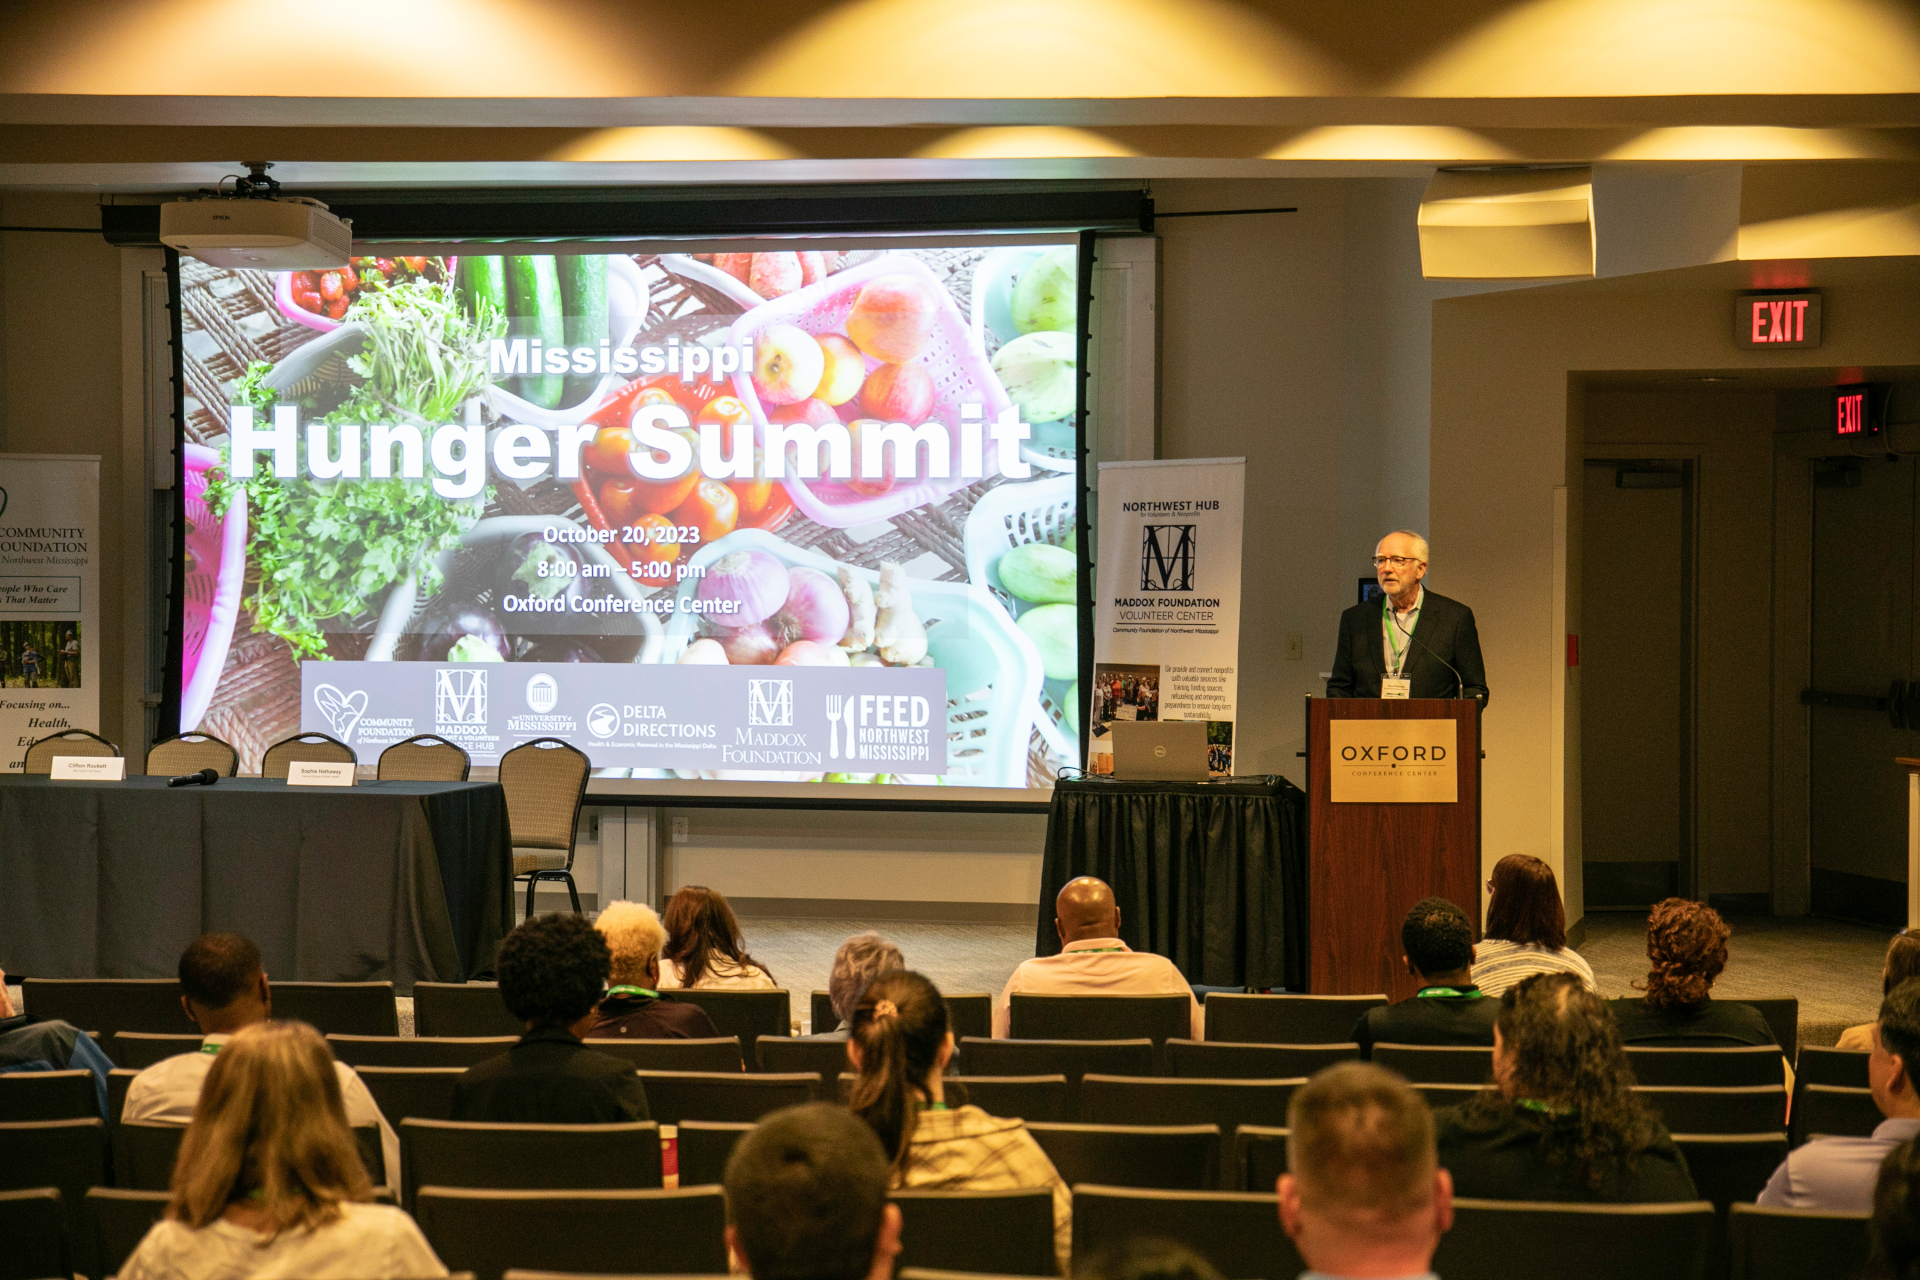 Solutions for Food Insecurity Will Take Many Partners: 2023 Mississippi Hunger Summit